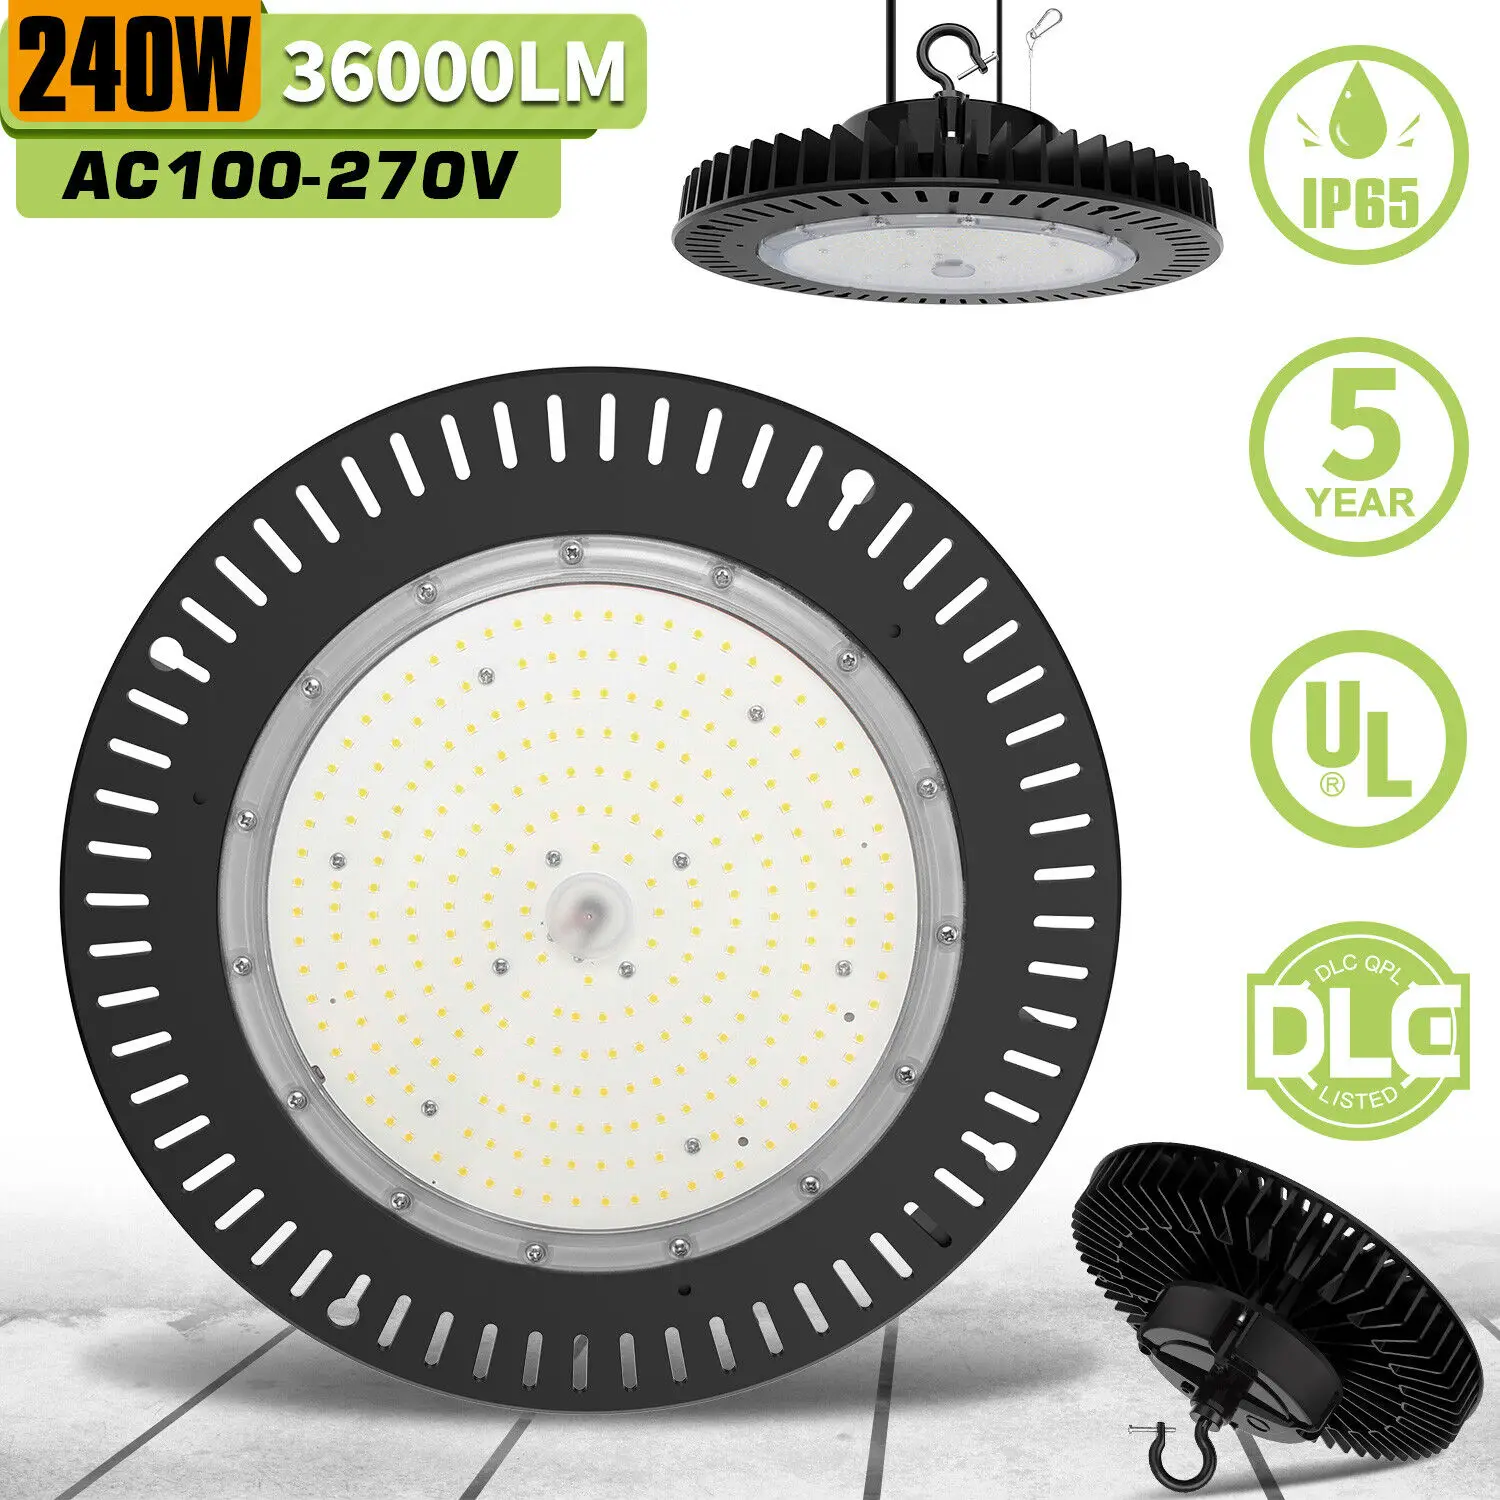 LED High Bay Light 240W 36,000lm 5000K 0-10V Dimmable UL Listed US Hook 5' Cable Alternative to 1000W MH/HPS for Gym Warehouse